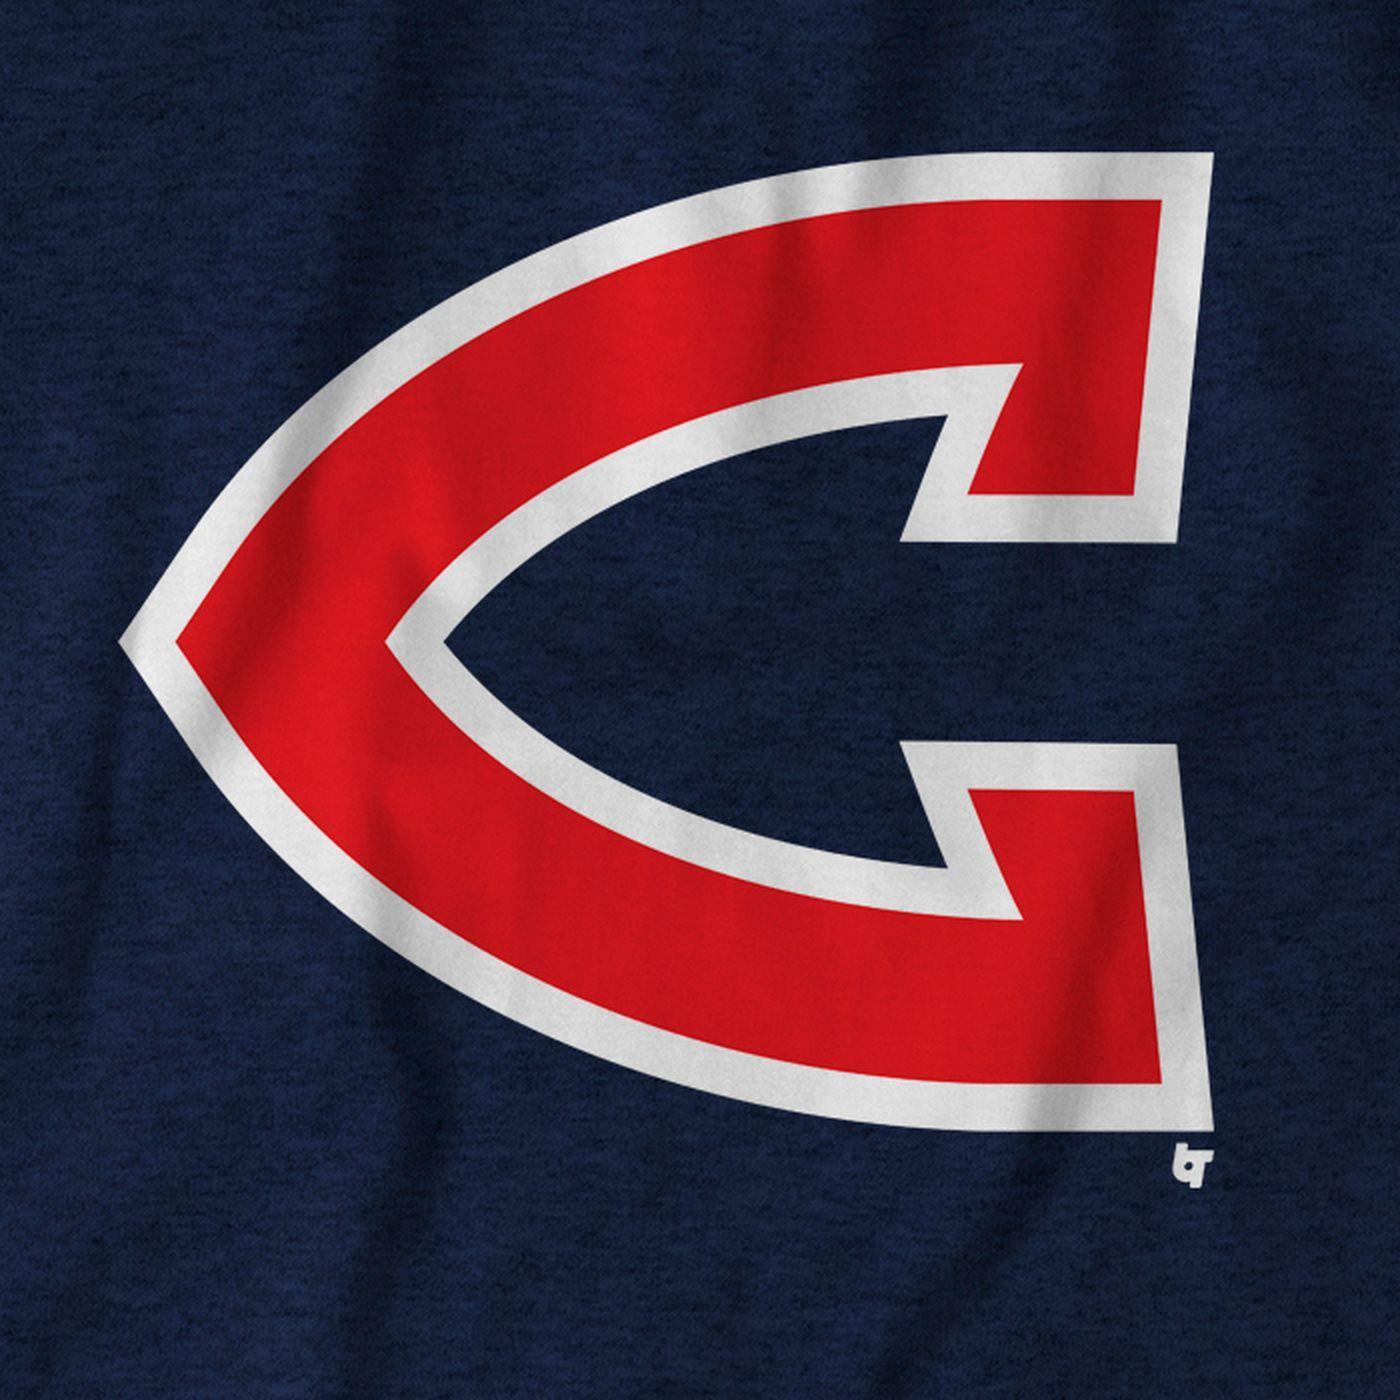 Cleveland Indians Logo - BreakingT has a new Indians logo idea and it's kinda great's